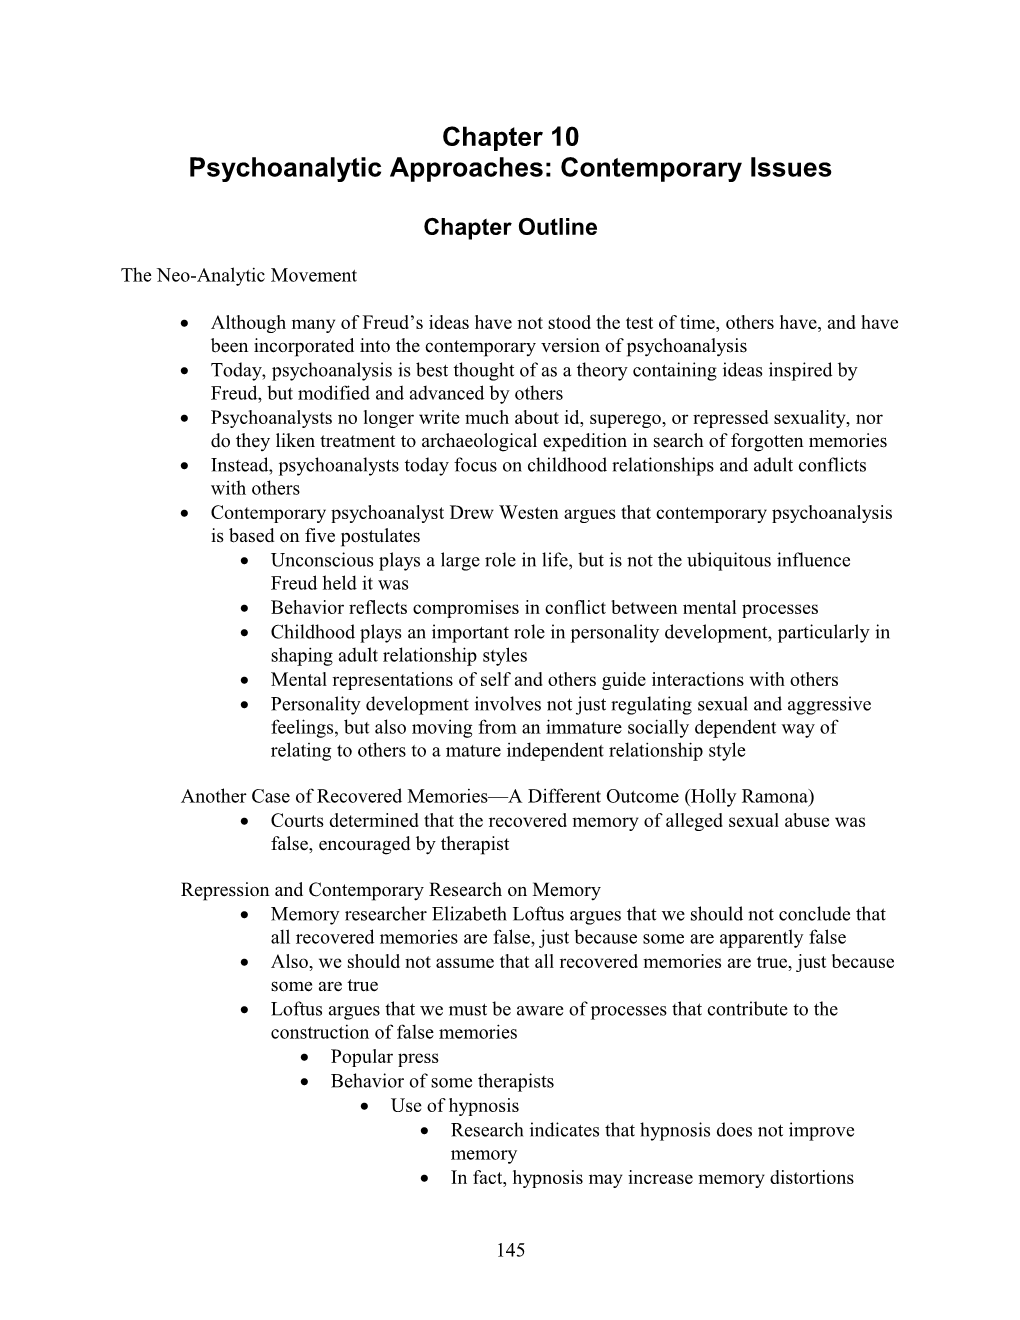 Psychoanalytic Approaches: Contemporary Issues